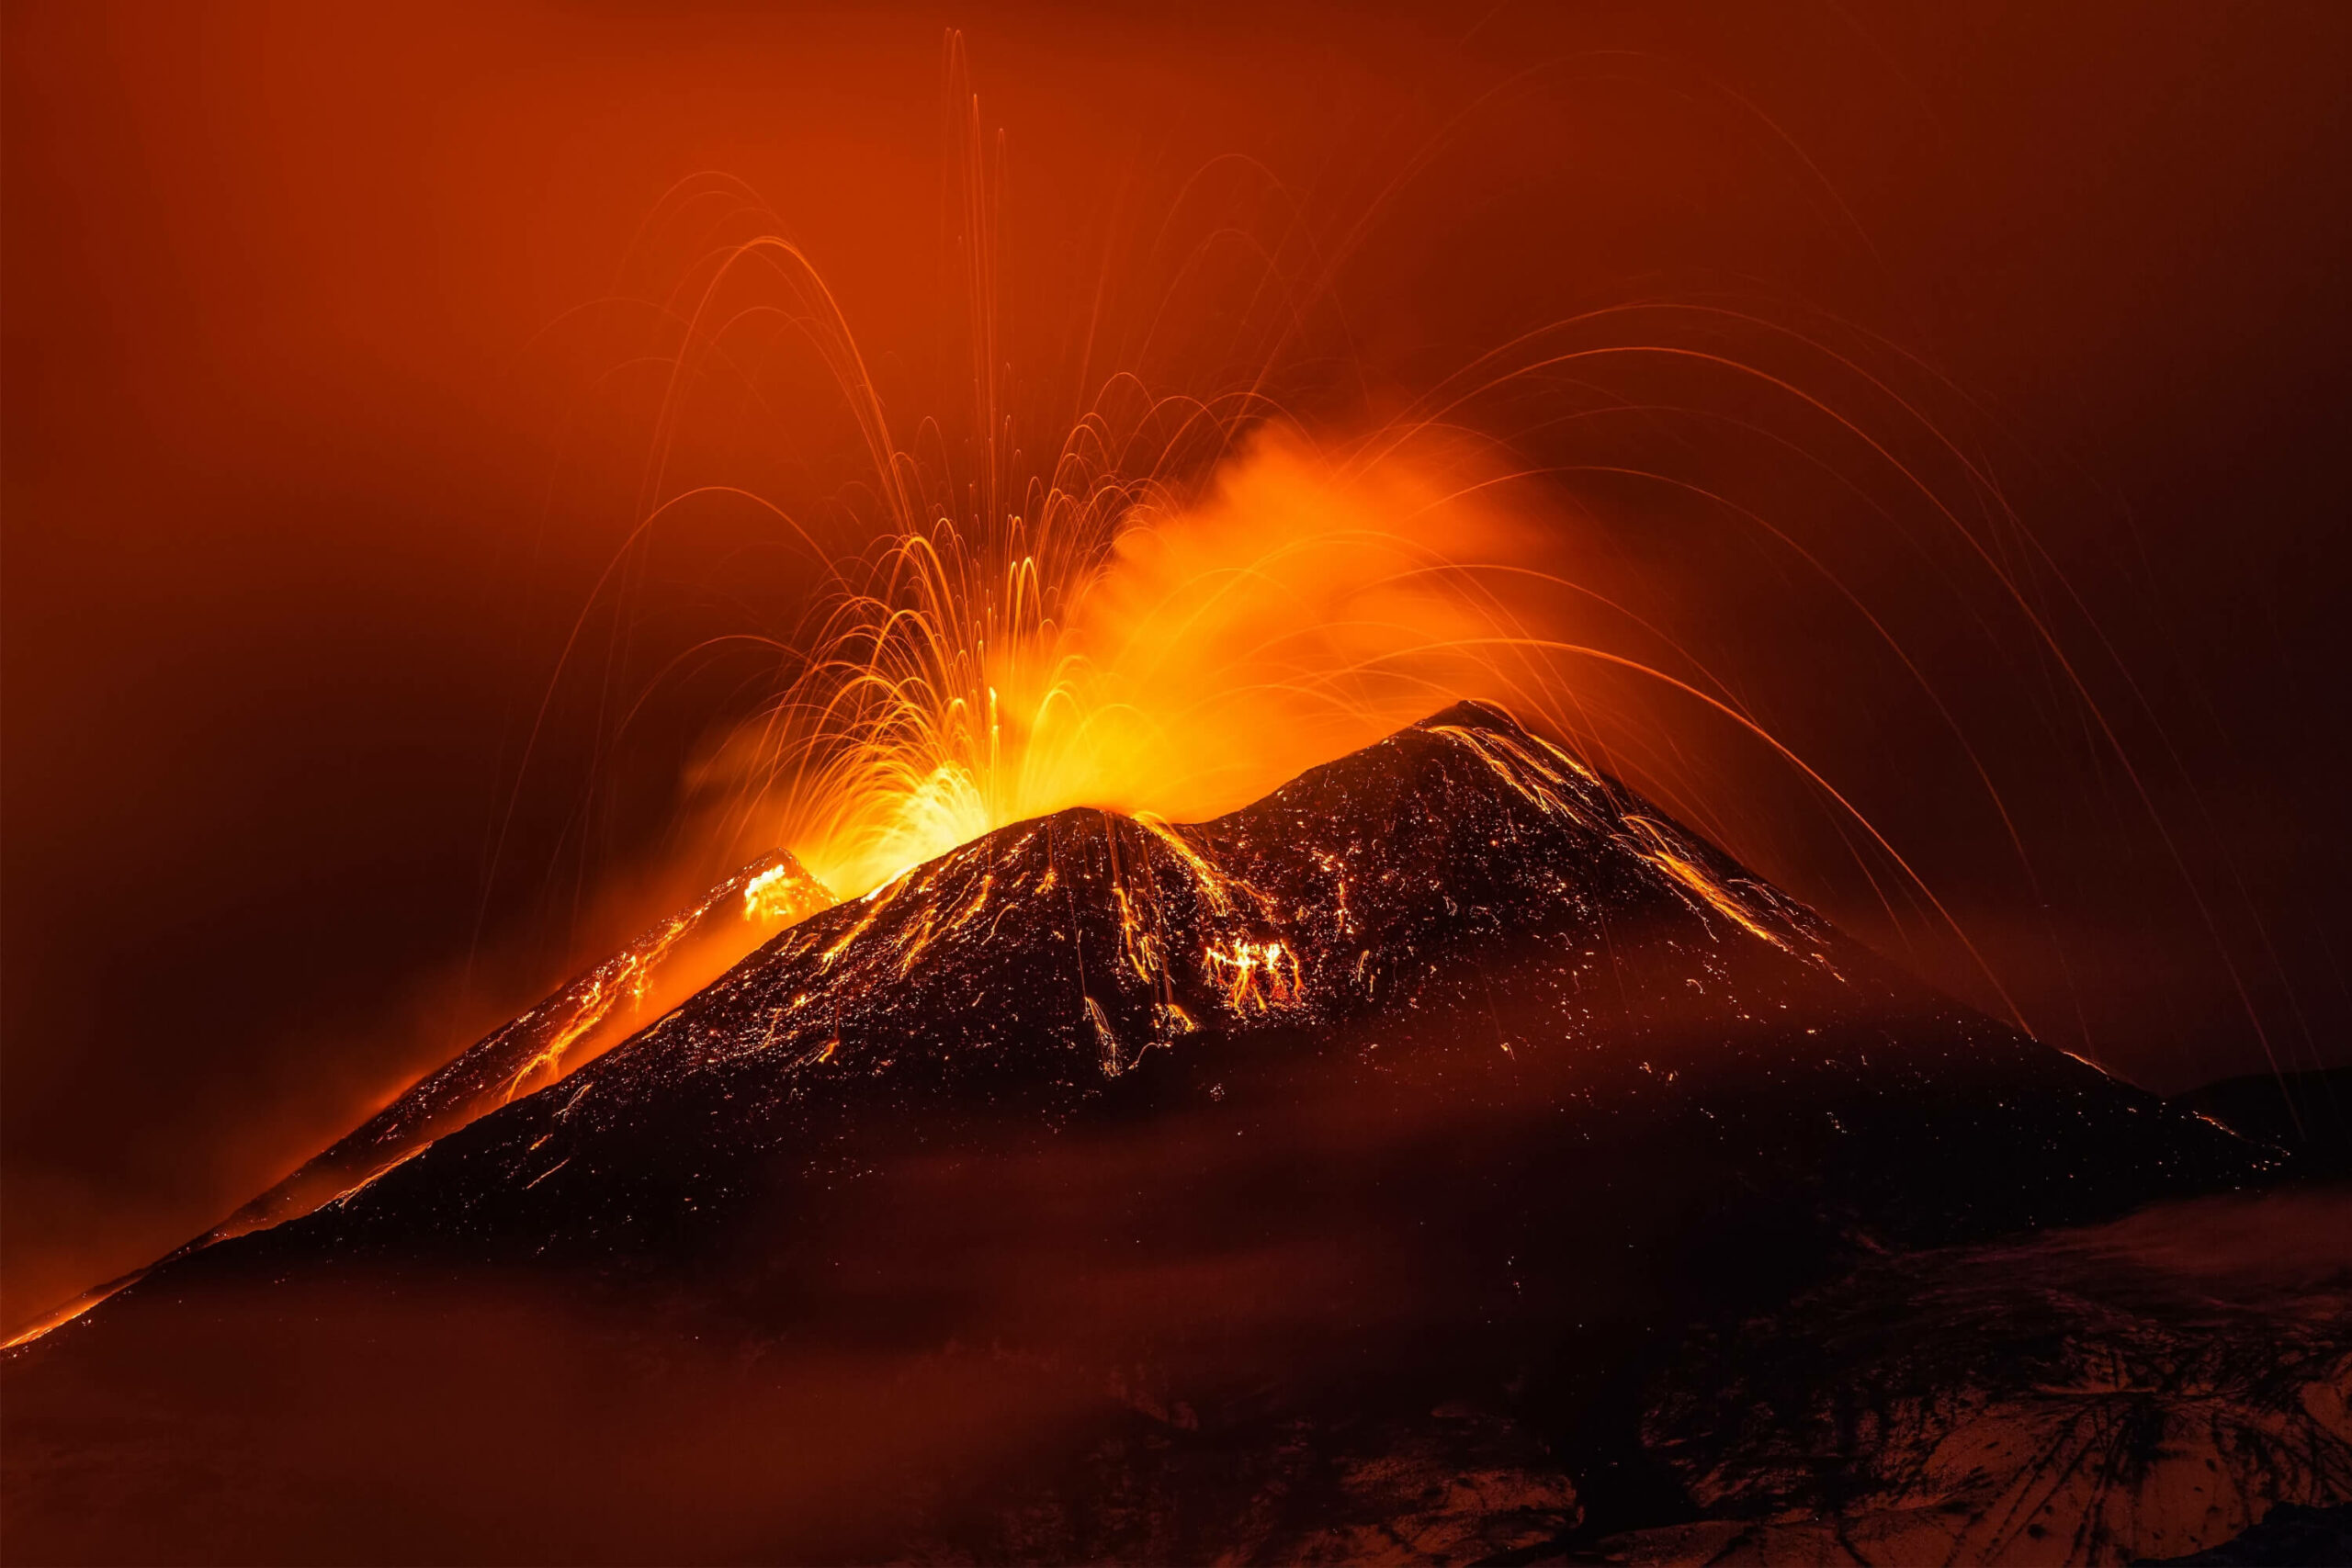 A volcano is lit up at night with orange smoke, an exciting sight for adventure travel enthusiasts.